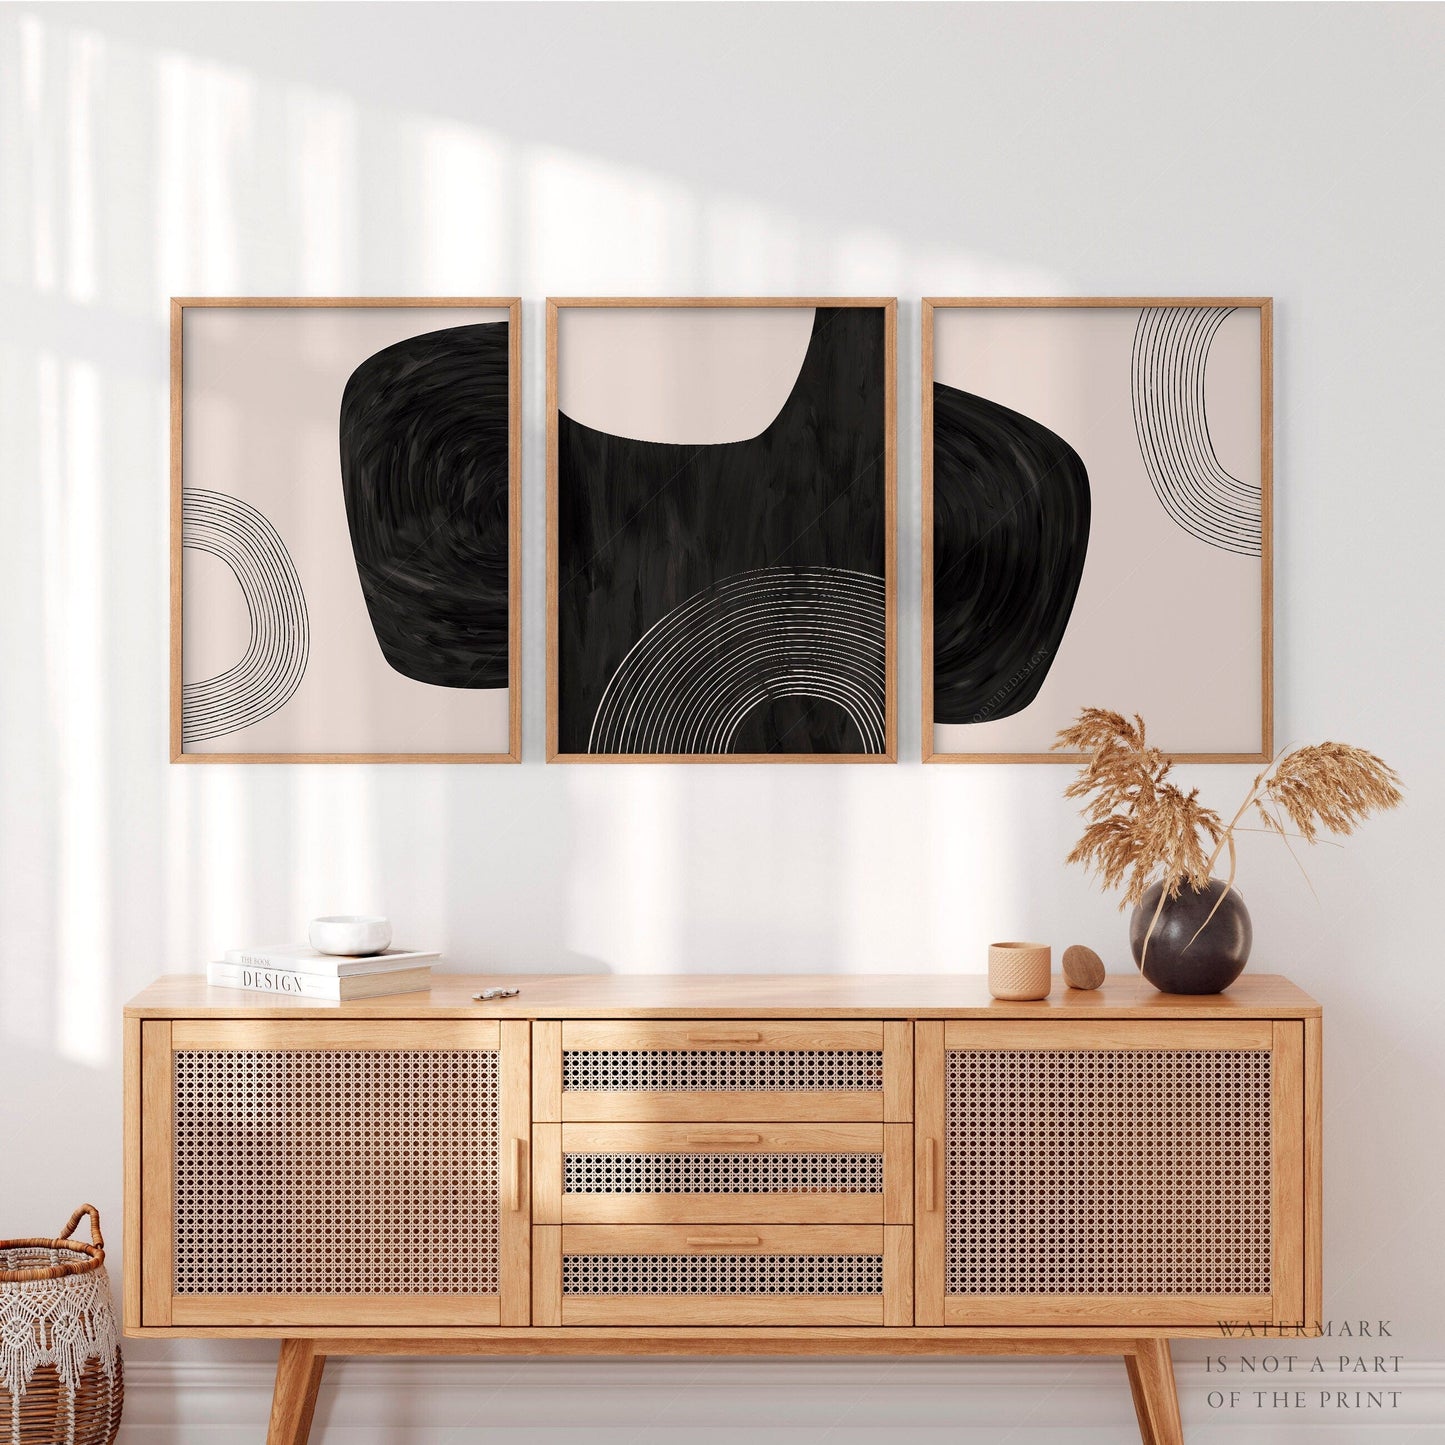 Home Poster Decor Single Modern Set of 3 Art, Neutral Tones, Beige Black Minimalist, Gallery Wall, Abstract Wall Art, Simple Shapes, Line Print, Living Wall Decor 10